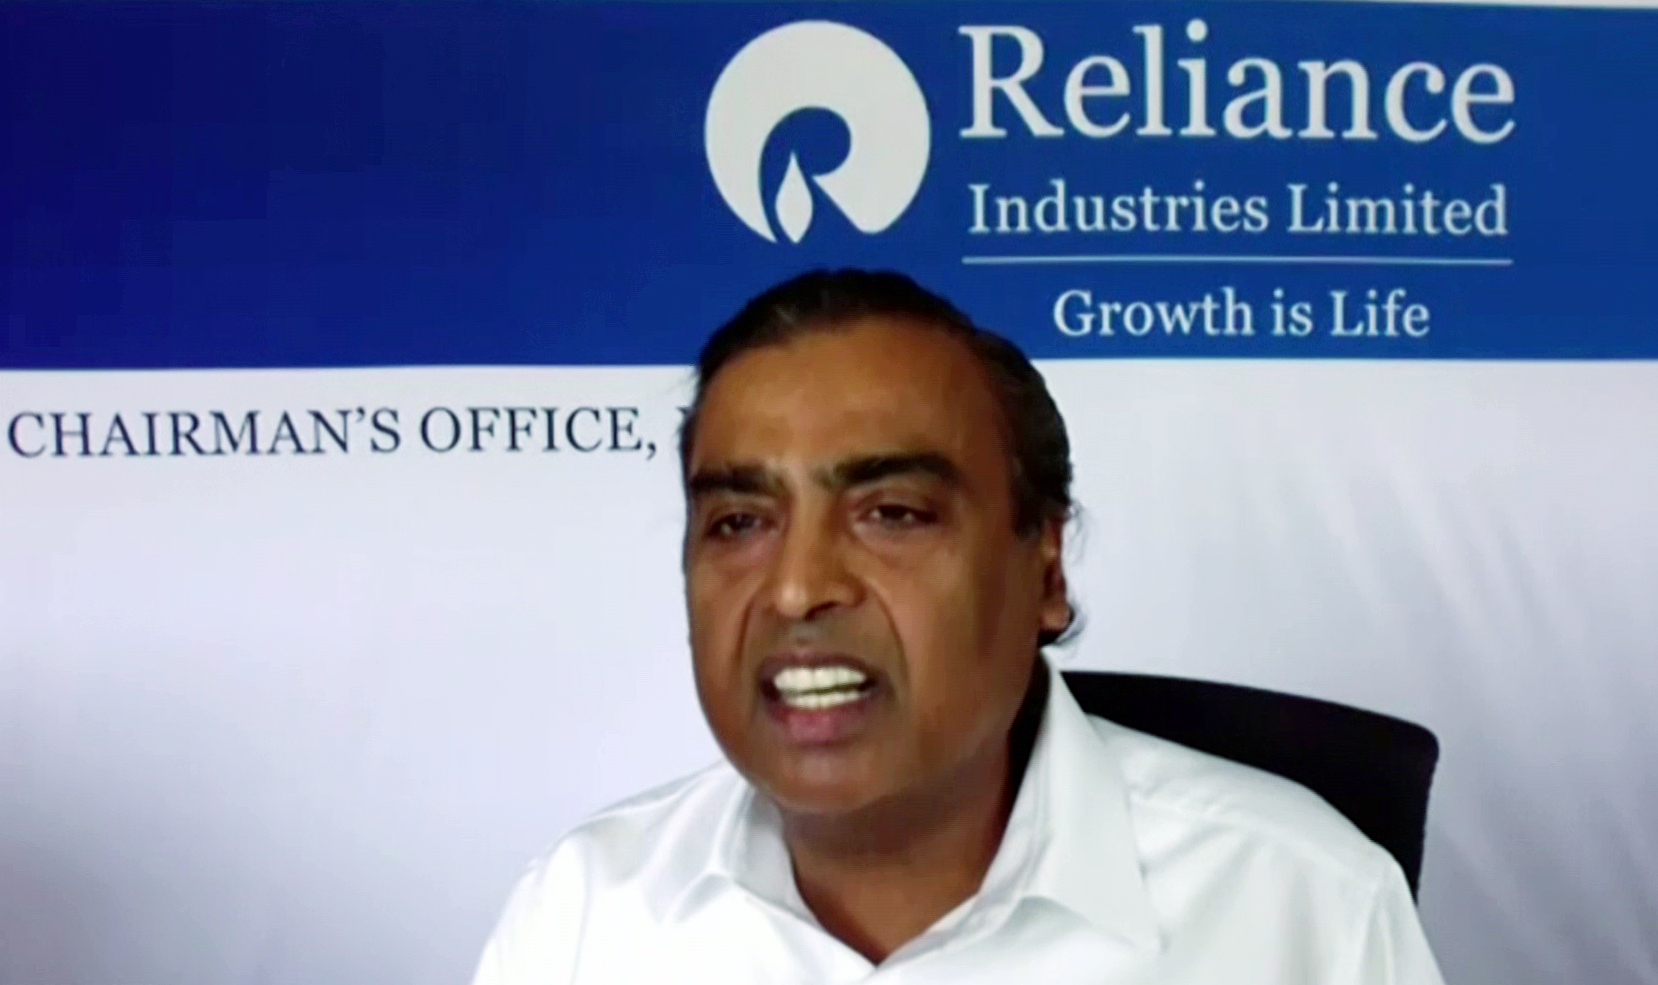 Mukesh Ambani bats for India’s $5 tn leap, pushes for 5G rollout